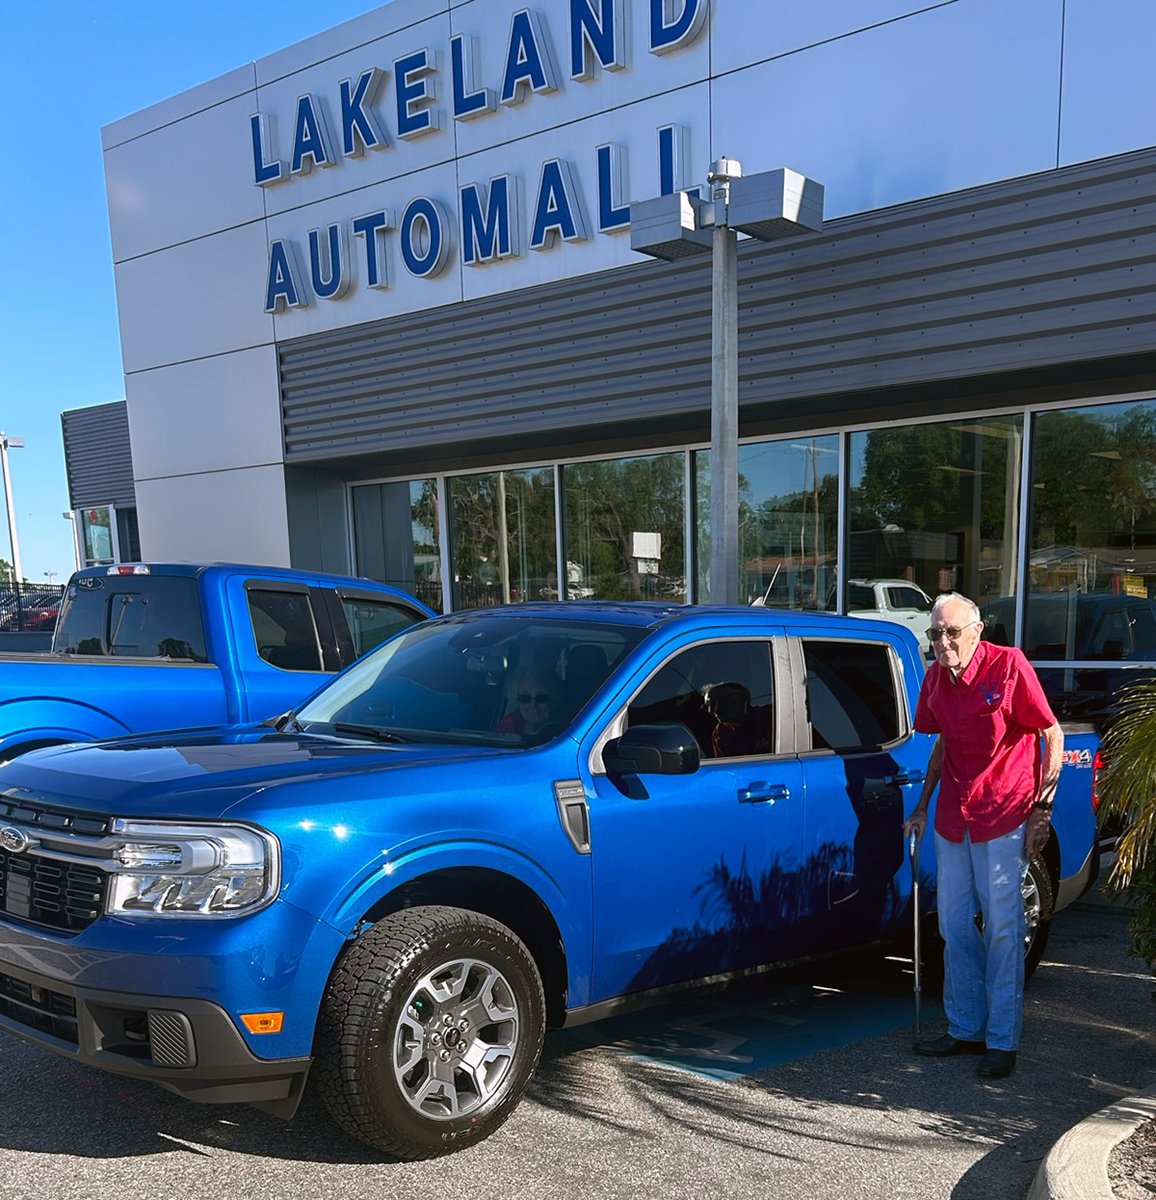 The #2024Maverick is a popular #NewTruck at #LakelandFord & when Patrick Mahanna decided it was time to #Upgrade, salesperson #TreyPeterson made sure buying was #Fast, #Fun & #Easy with #GreatService & a #GreatDeal. #Congratulatiosn Patrick & #ThankYou. We're here for you! #Ford